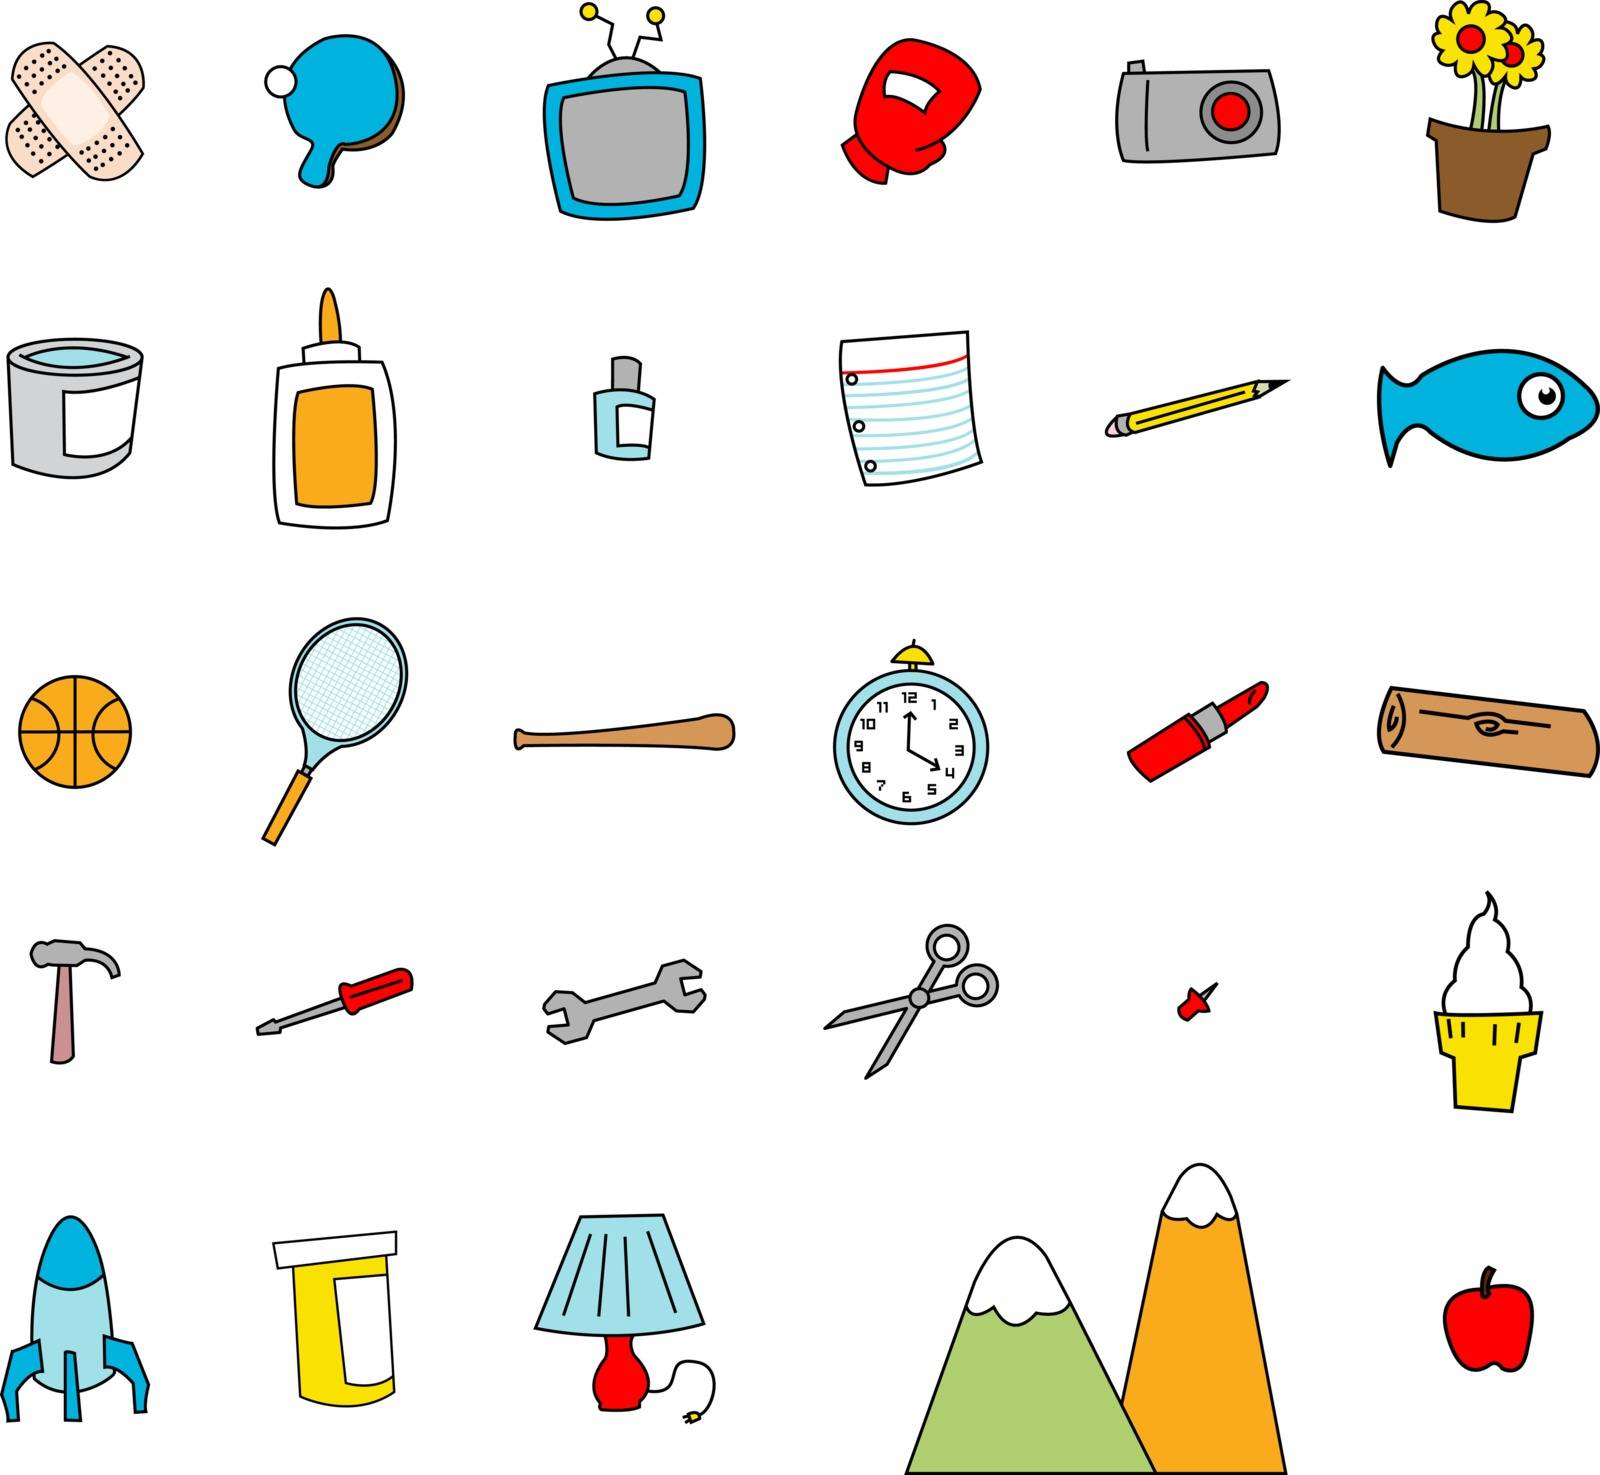 Childlike doodles of everyday objects in a simple cartoon style.